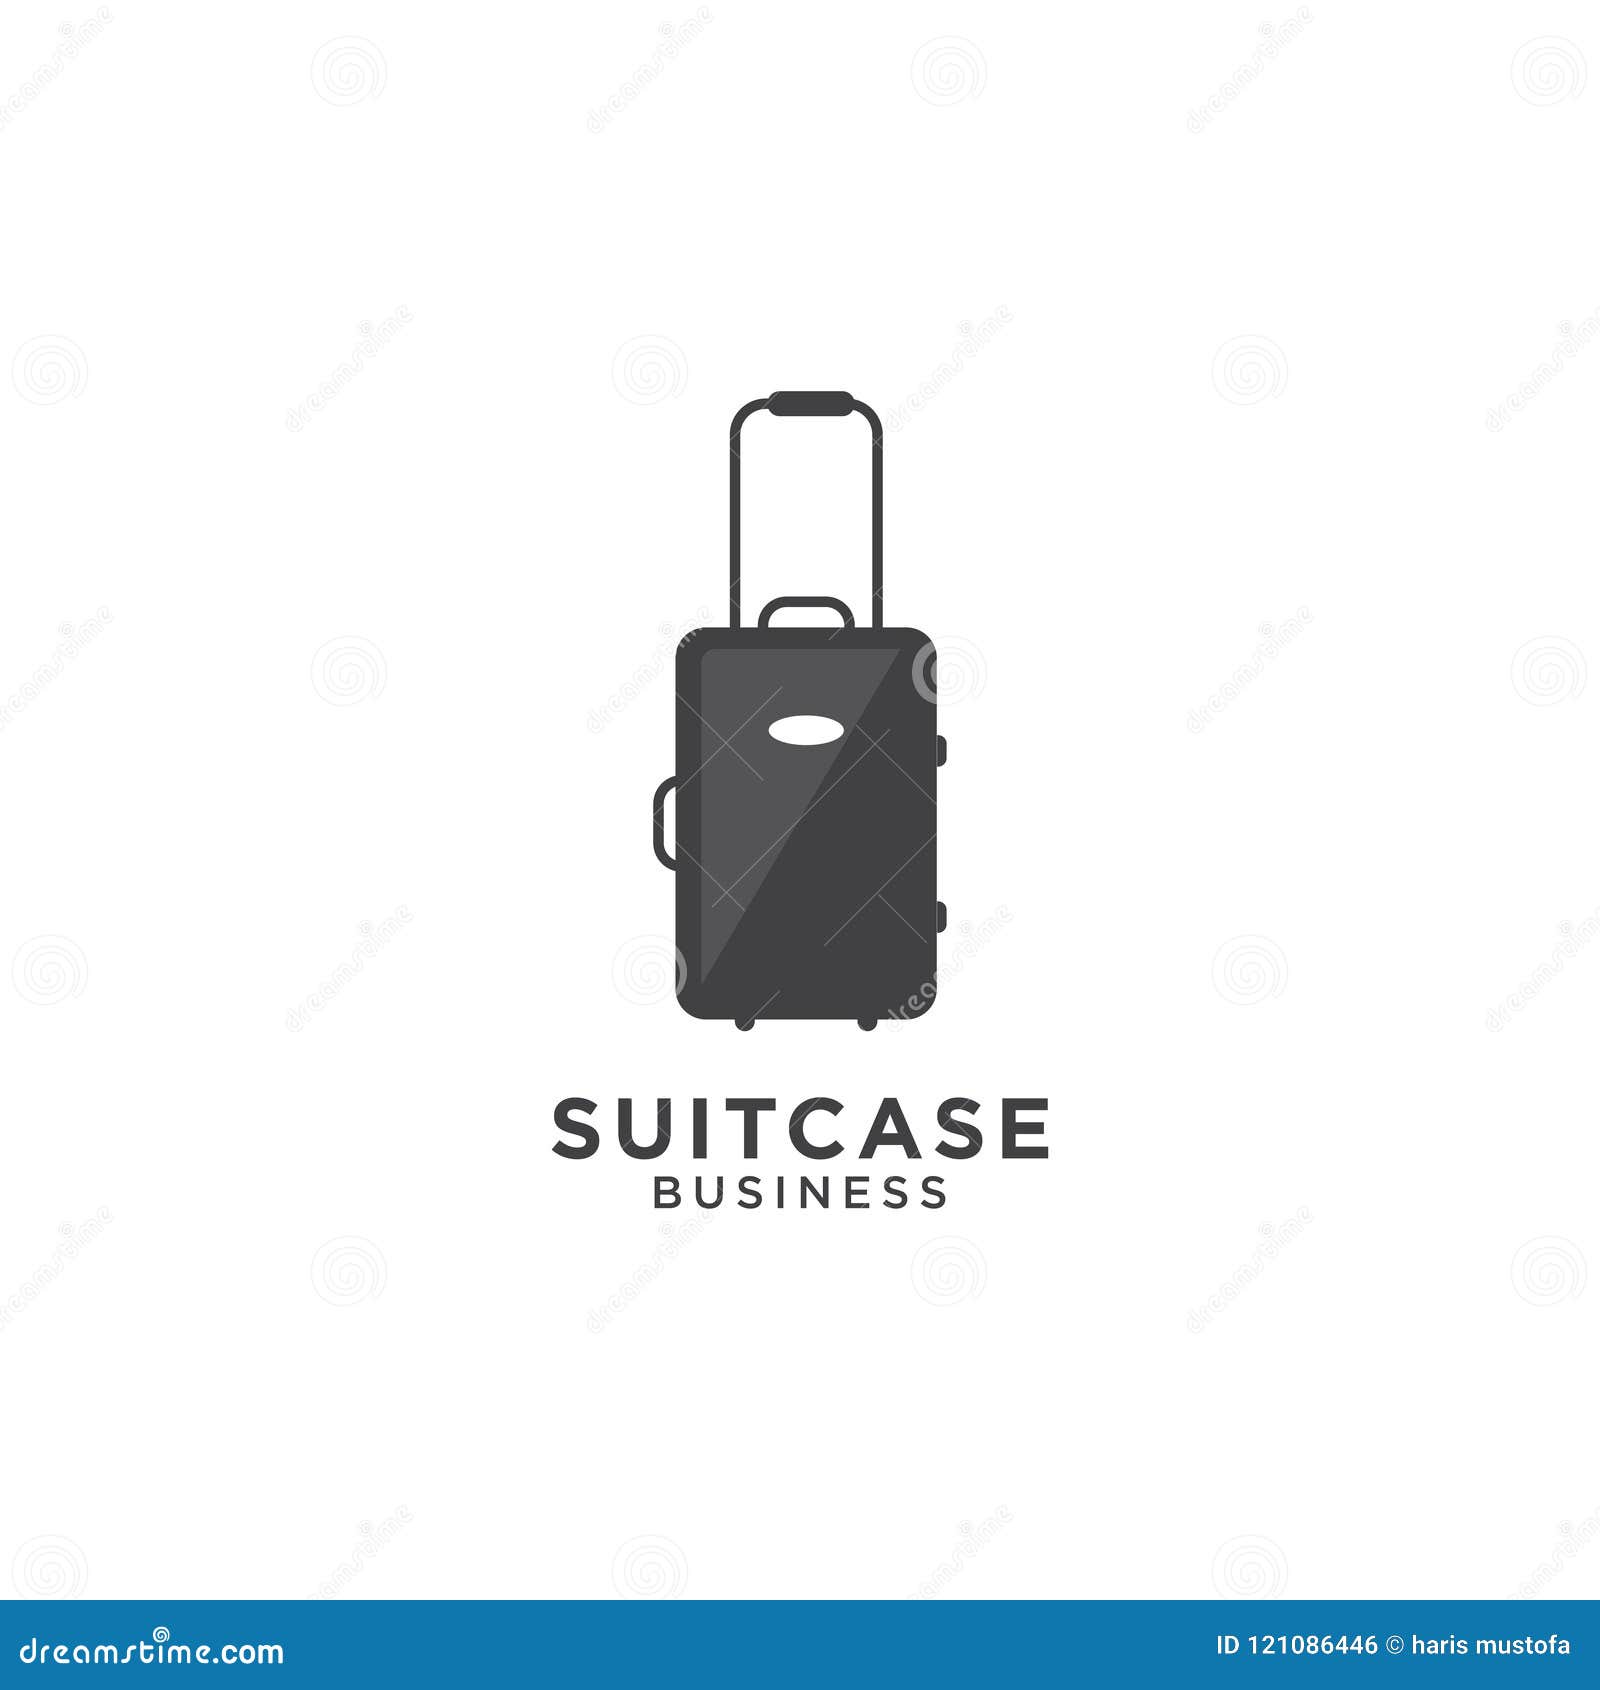 Download Suitcase Graphic Design Template Stock Vector ...